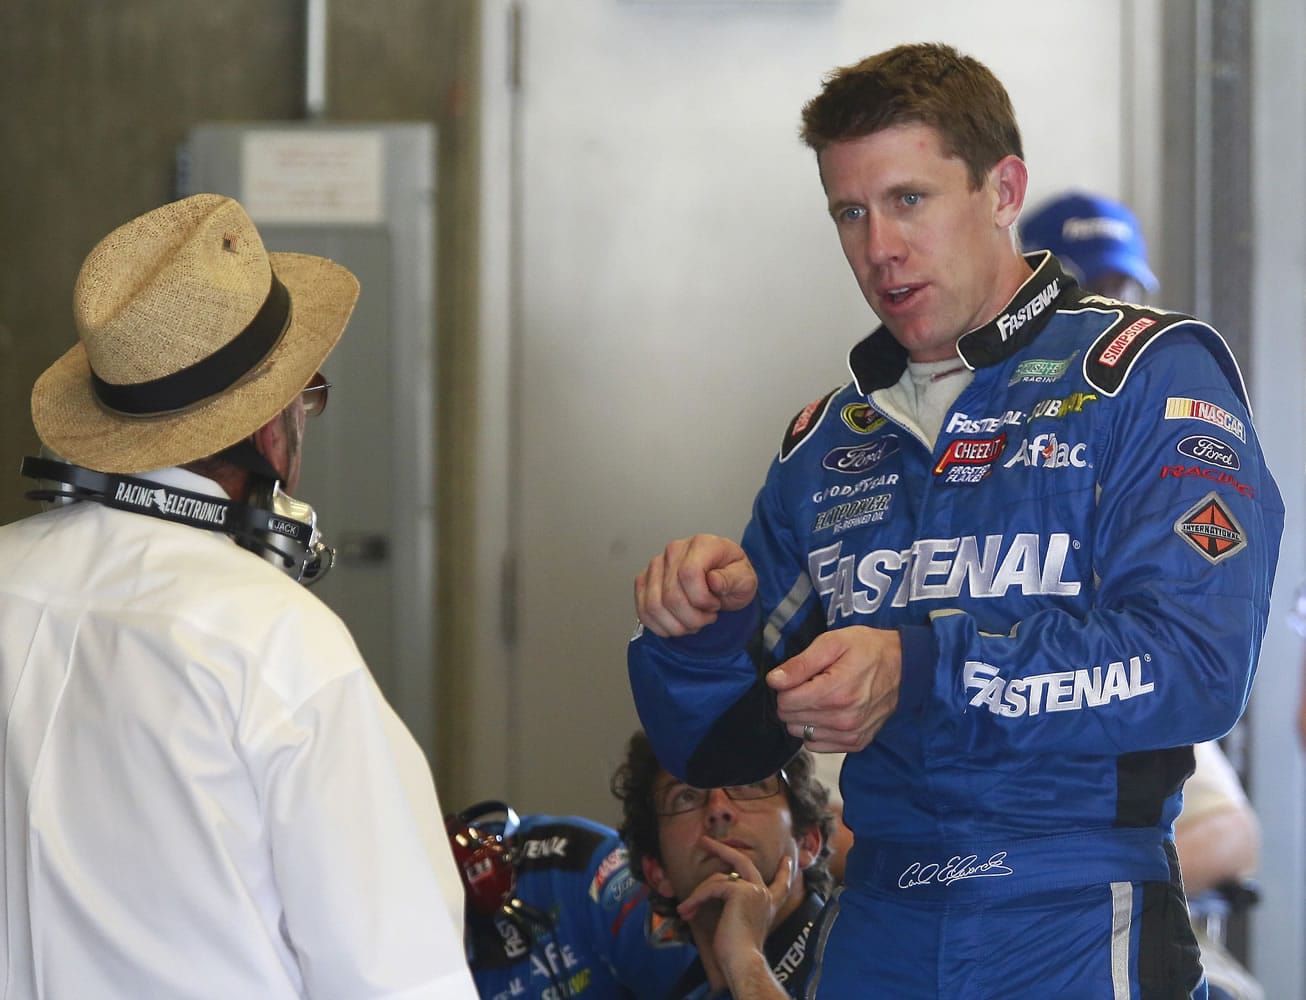 Driver Carl Edwards talks with owner Jack Roush during practice for the Brickyard 400 Sprint Cup series auto race at the Indianapolis Motor Speedway in Indianapolis, Friday, July 25, 2014.